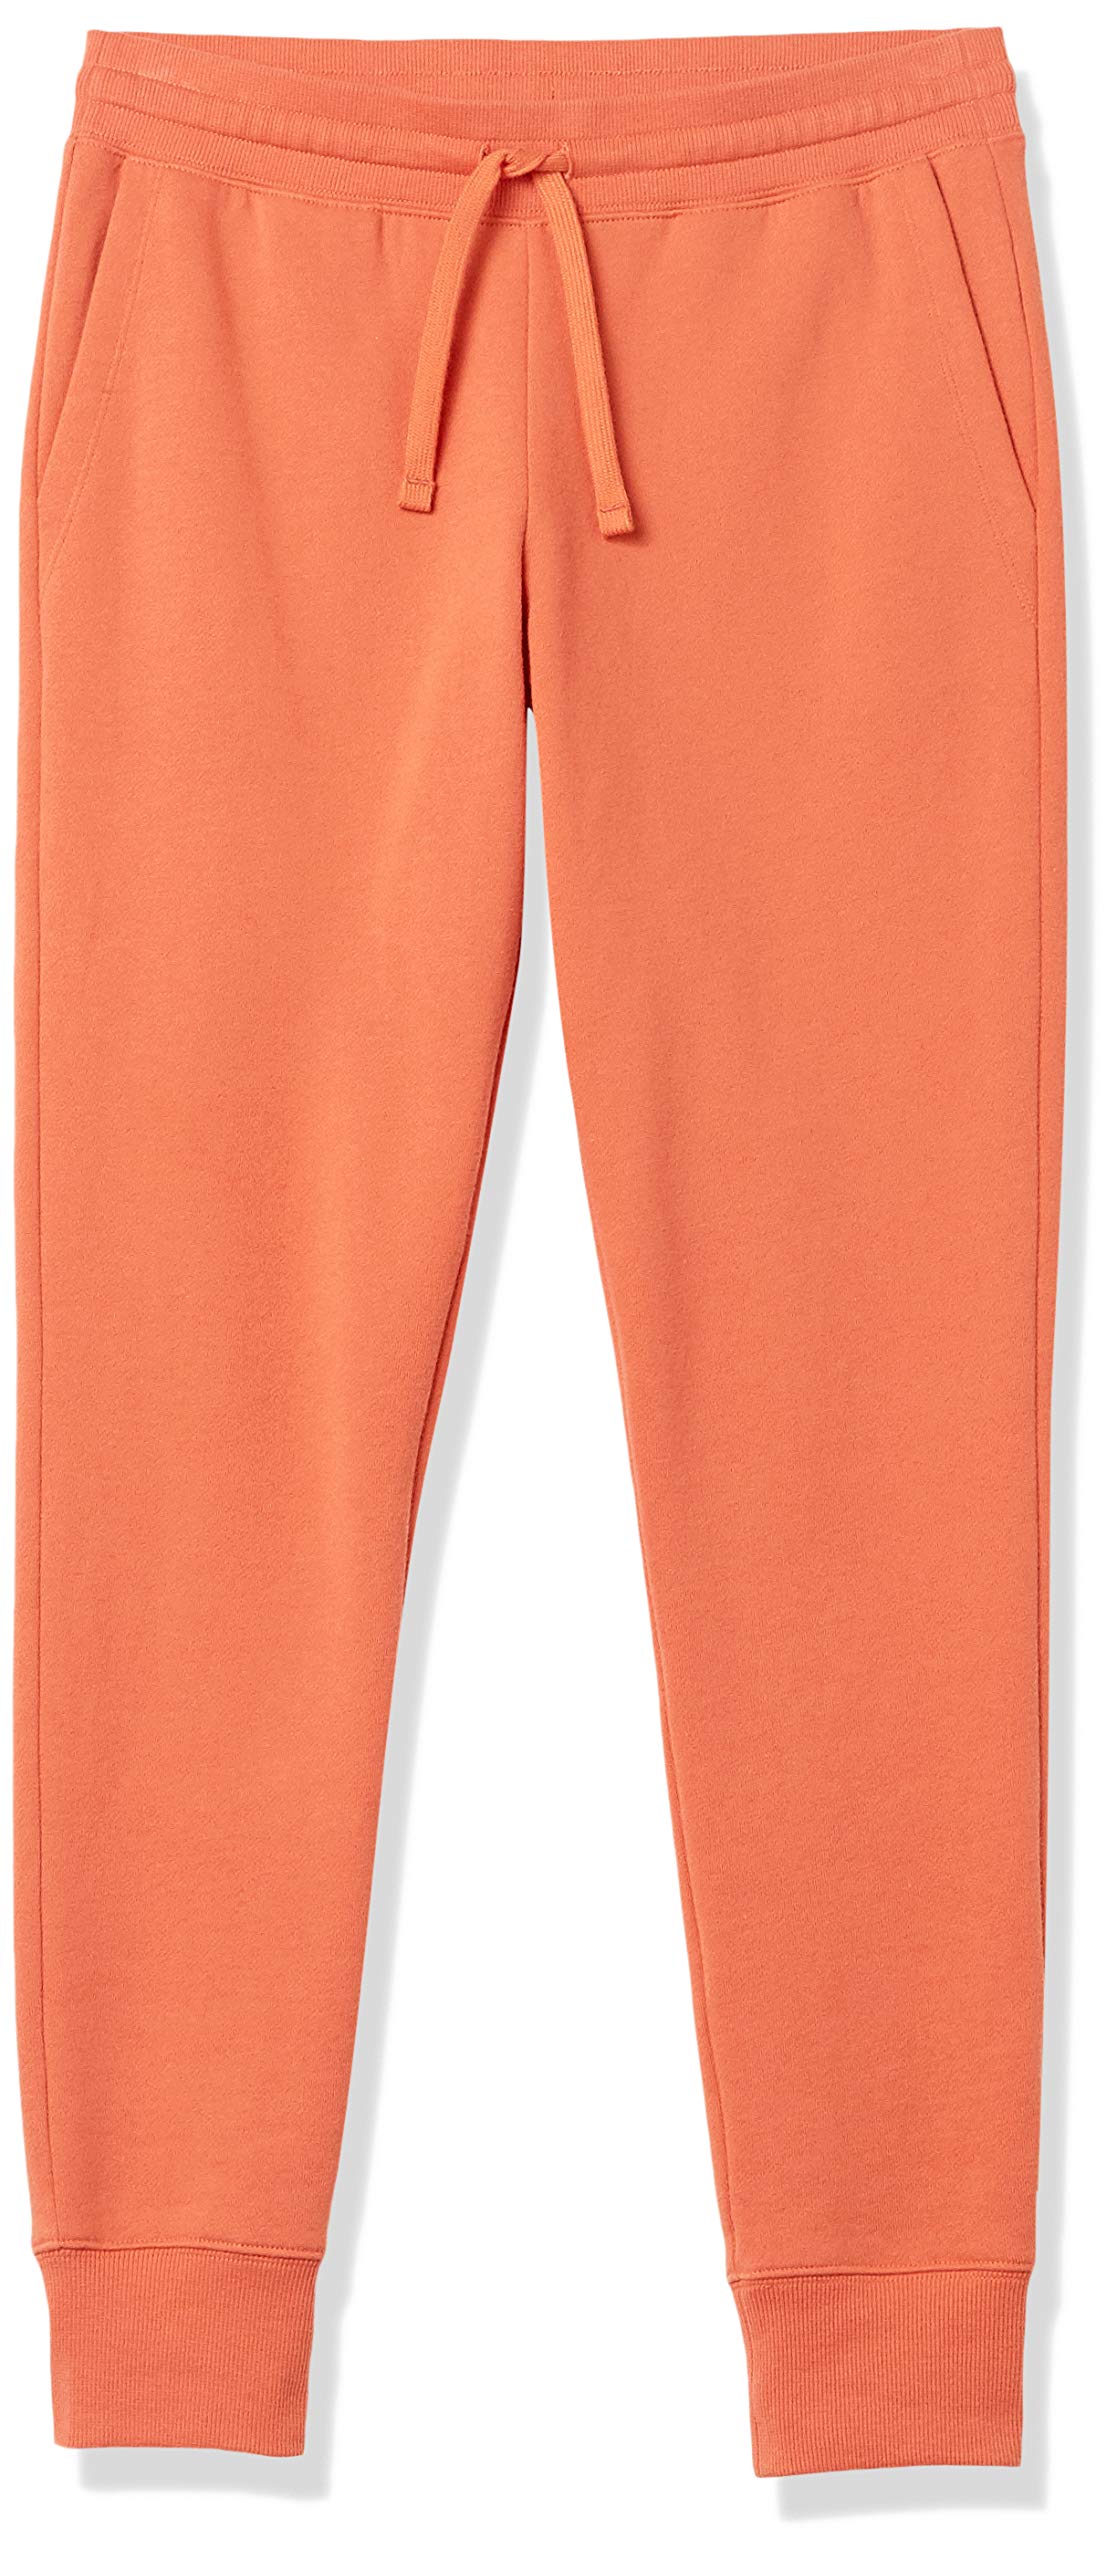 Amazon Essentials Women's French Terry Fleece Jogger Sweatpant (Available in Plus Size)